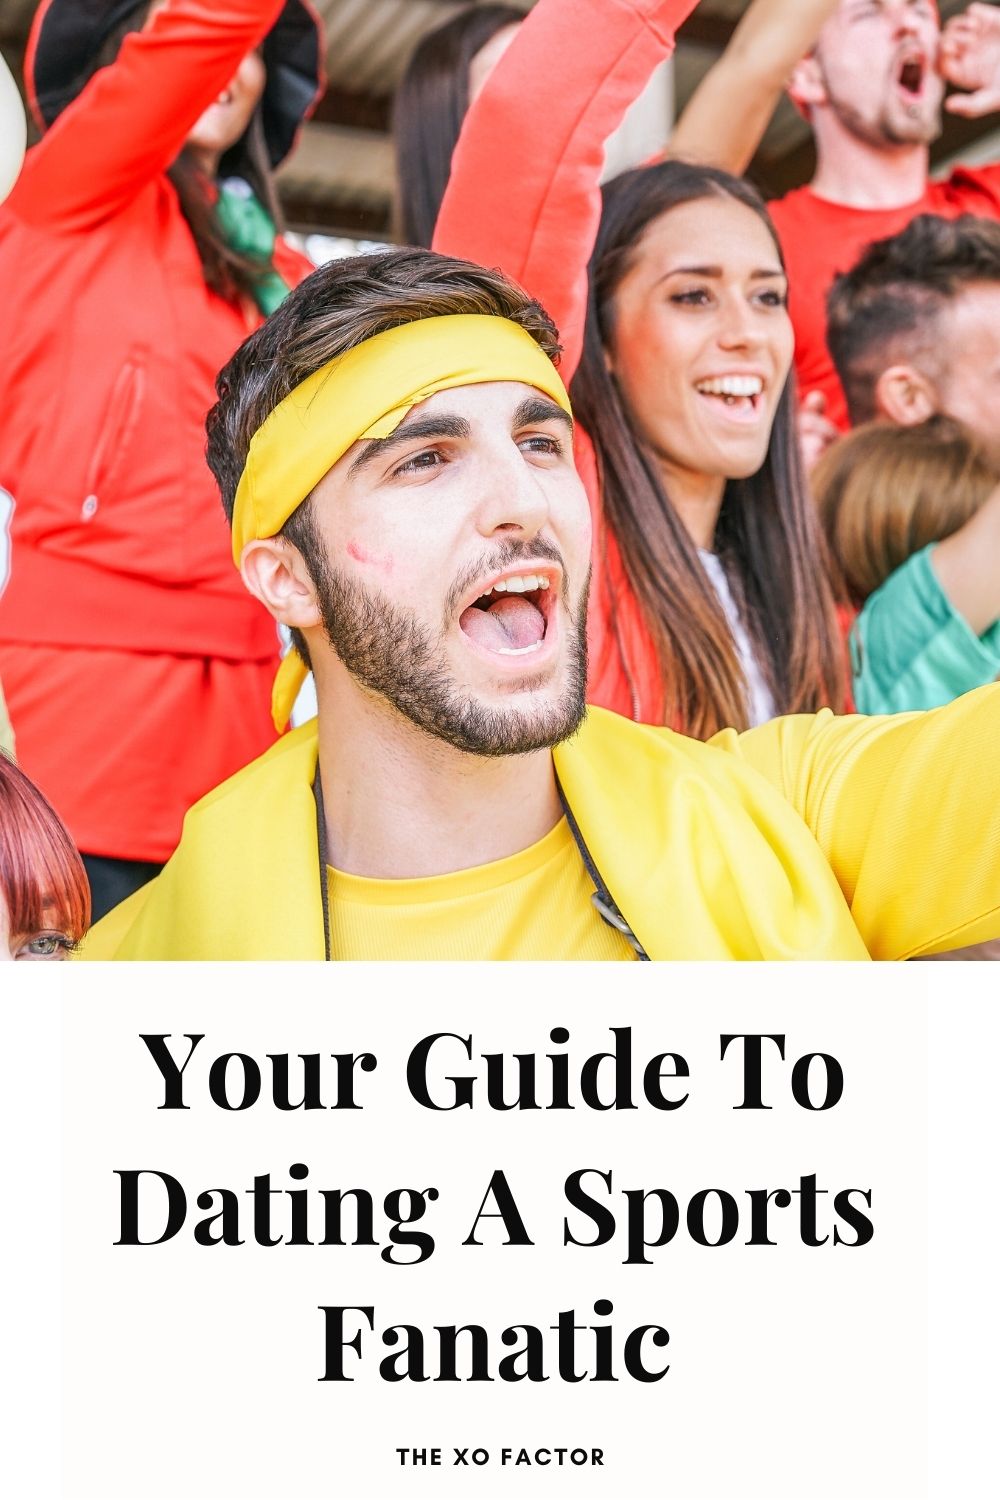 Your Guide To Dating A Sports Fanatic